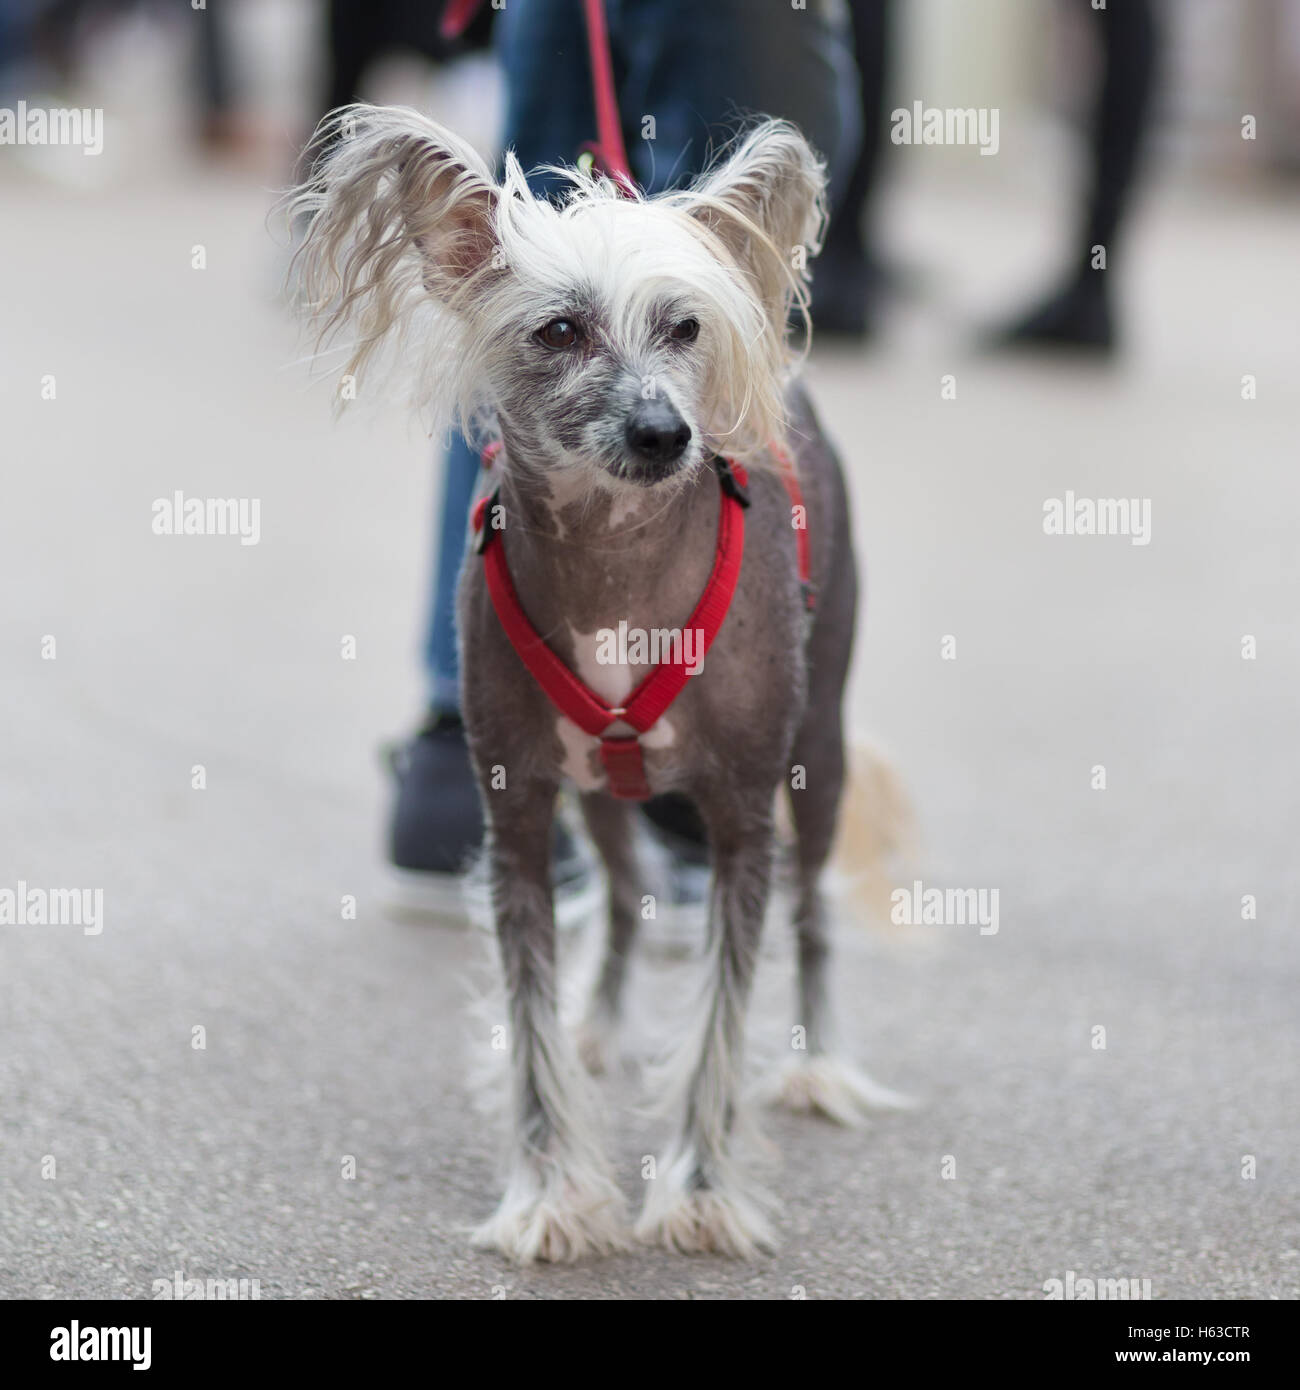 Chinese Crested Dog, Canis lupus familiaris, on a leash. Stock Photo